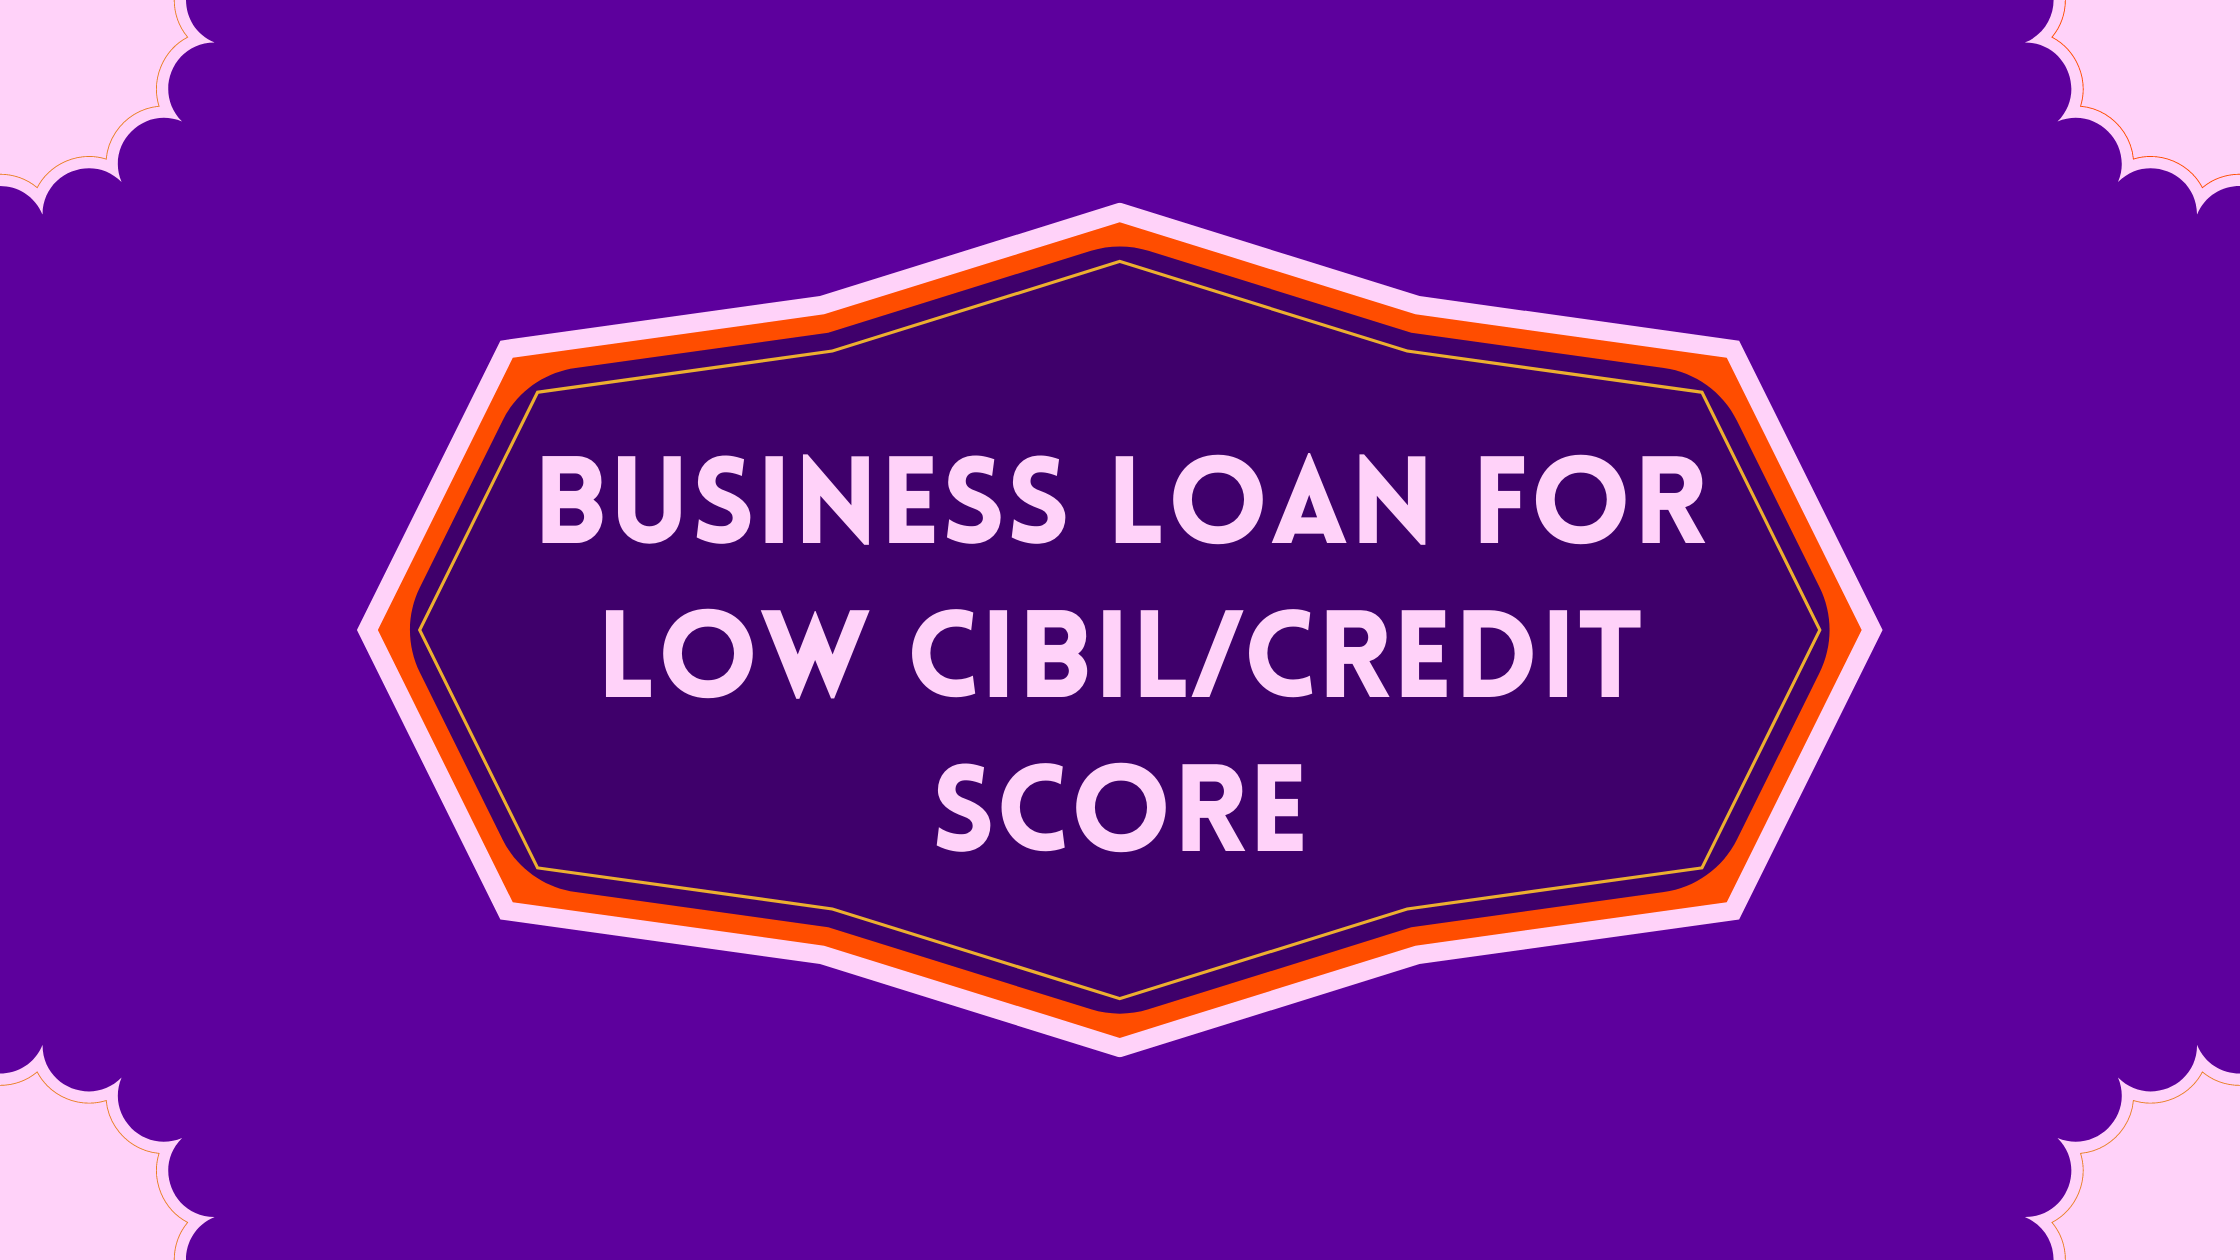 Business Loan for Low CIBIL